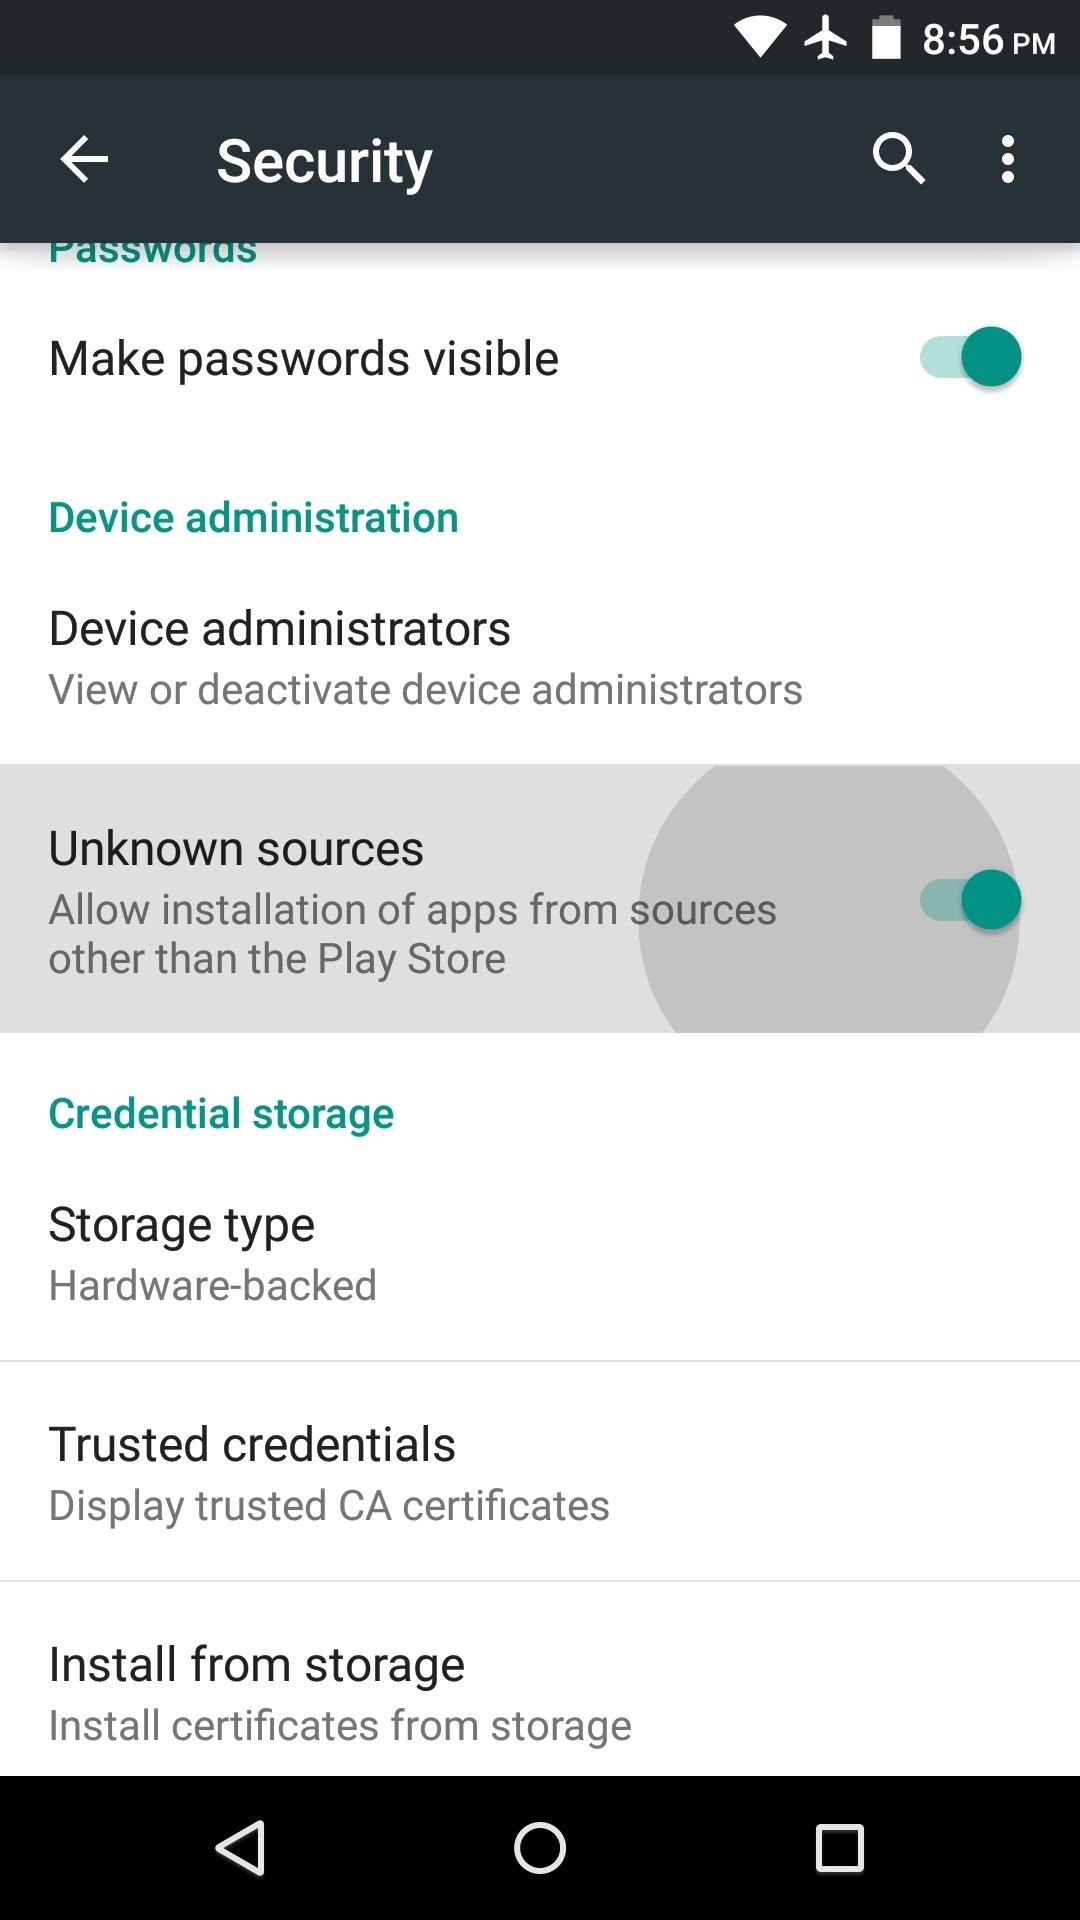 First of all, "allow installation from unknown sources" from settings